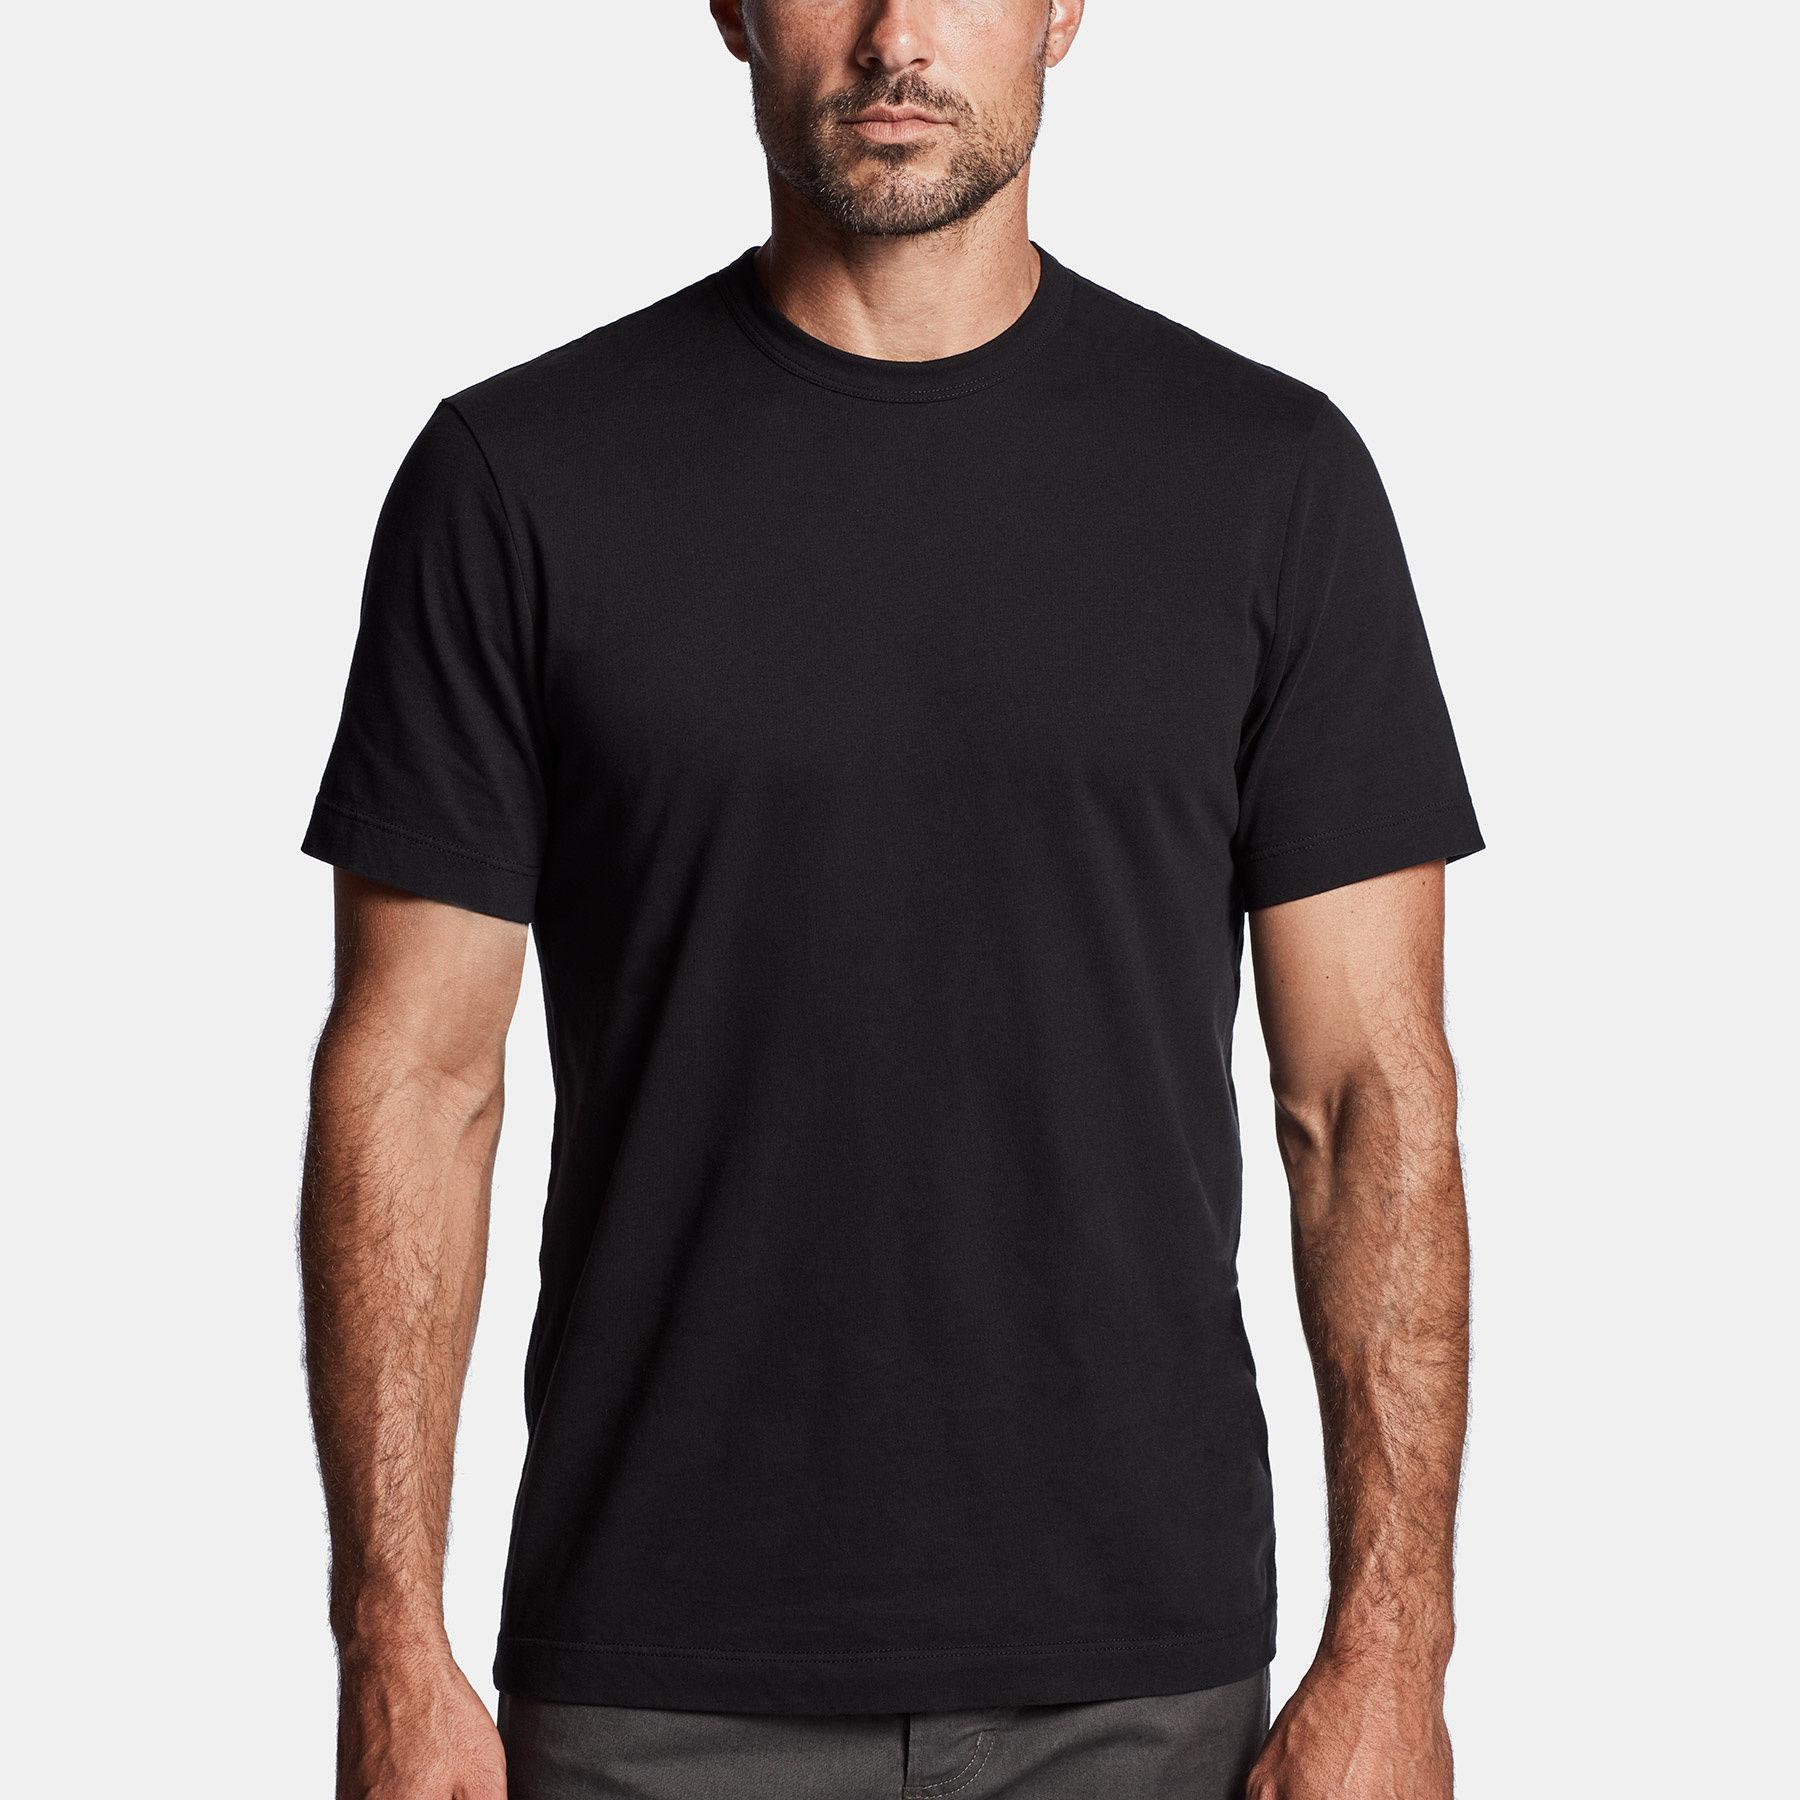 James Perse Brushed Cotton Jersey Tee in Black for Men - Lyst